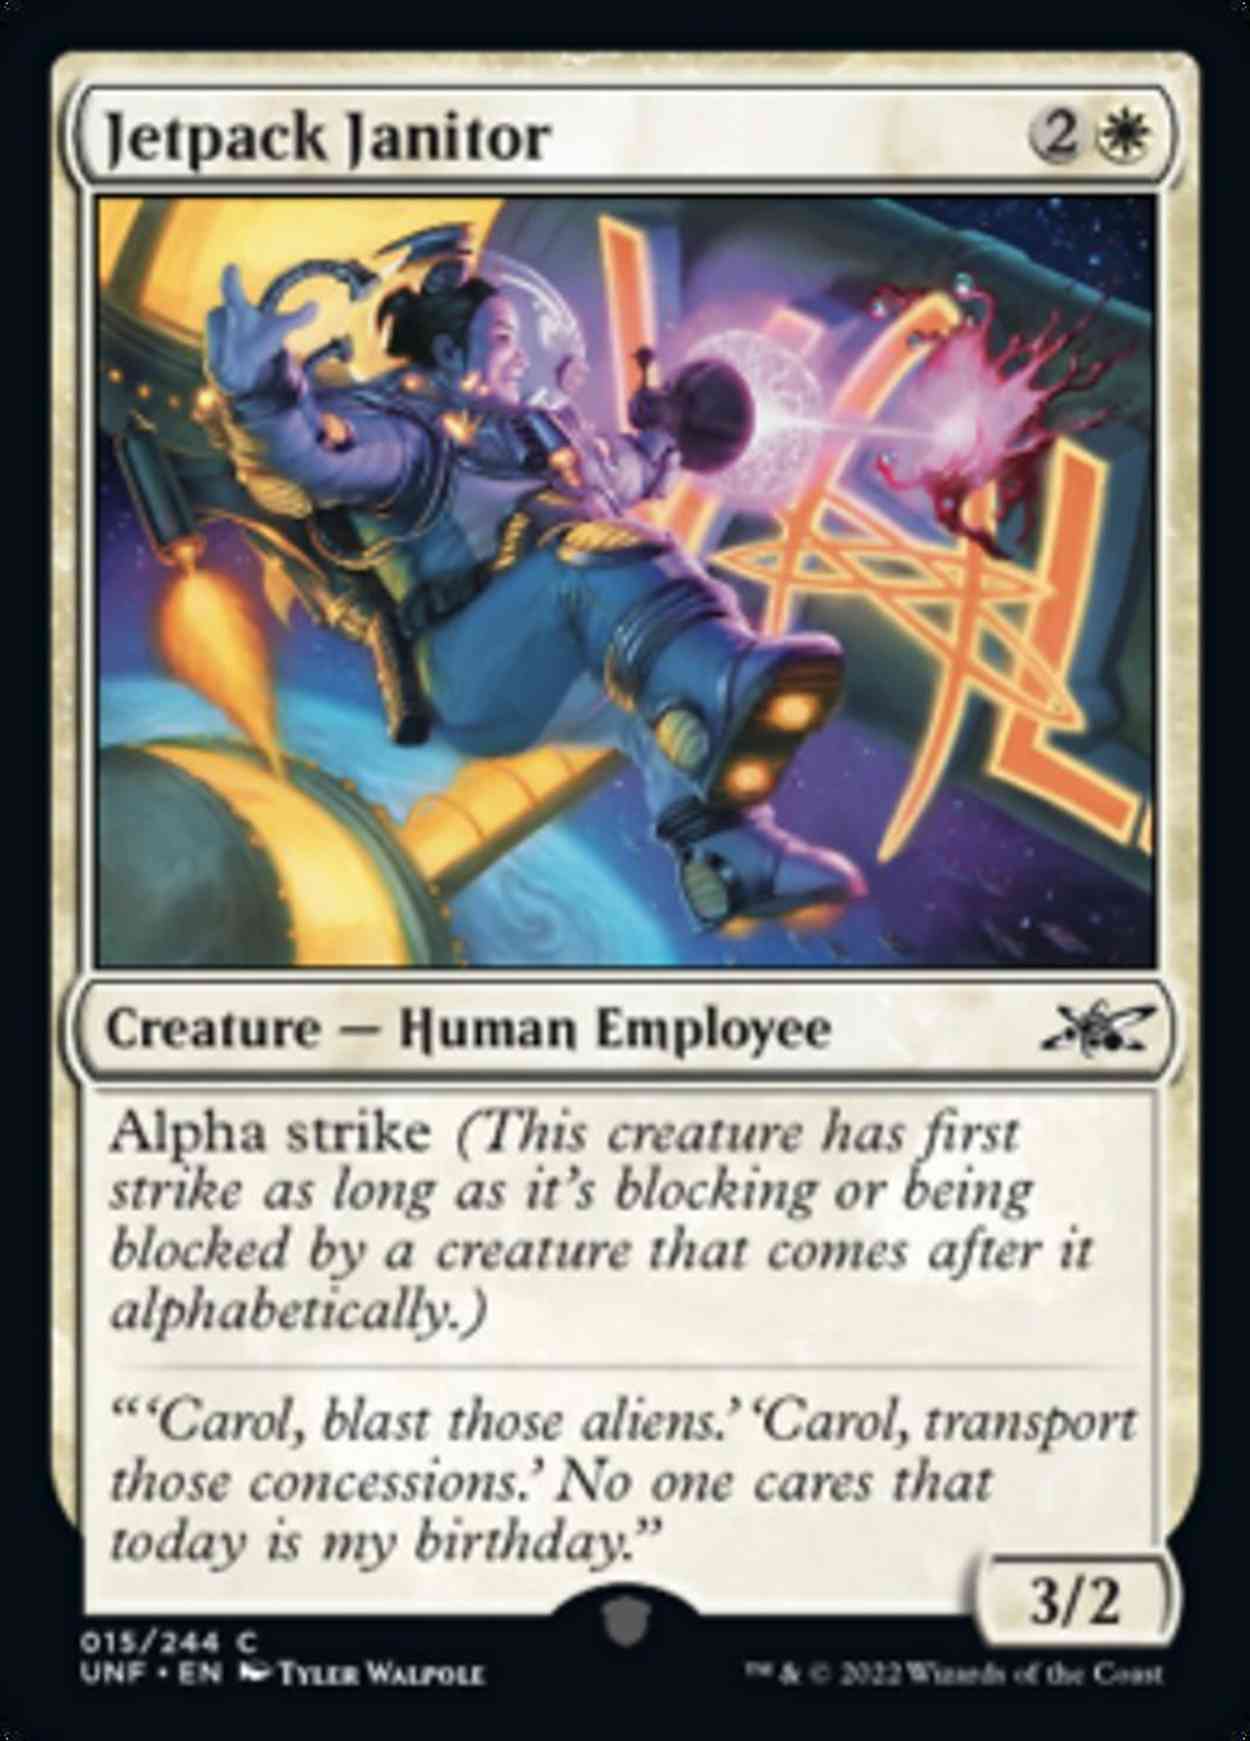 Jetpack Janitor magic card front